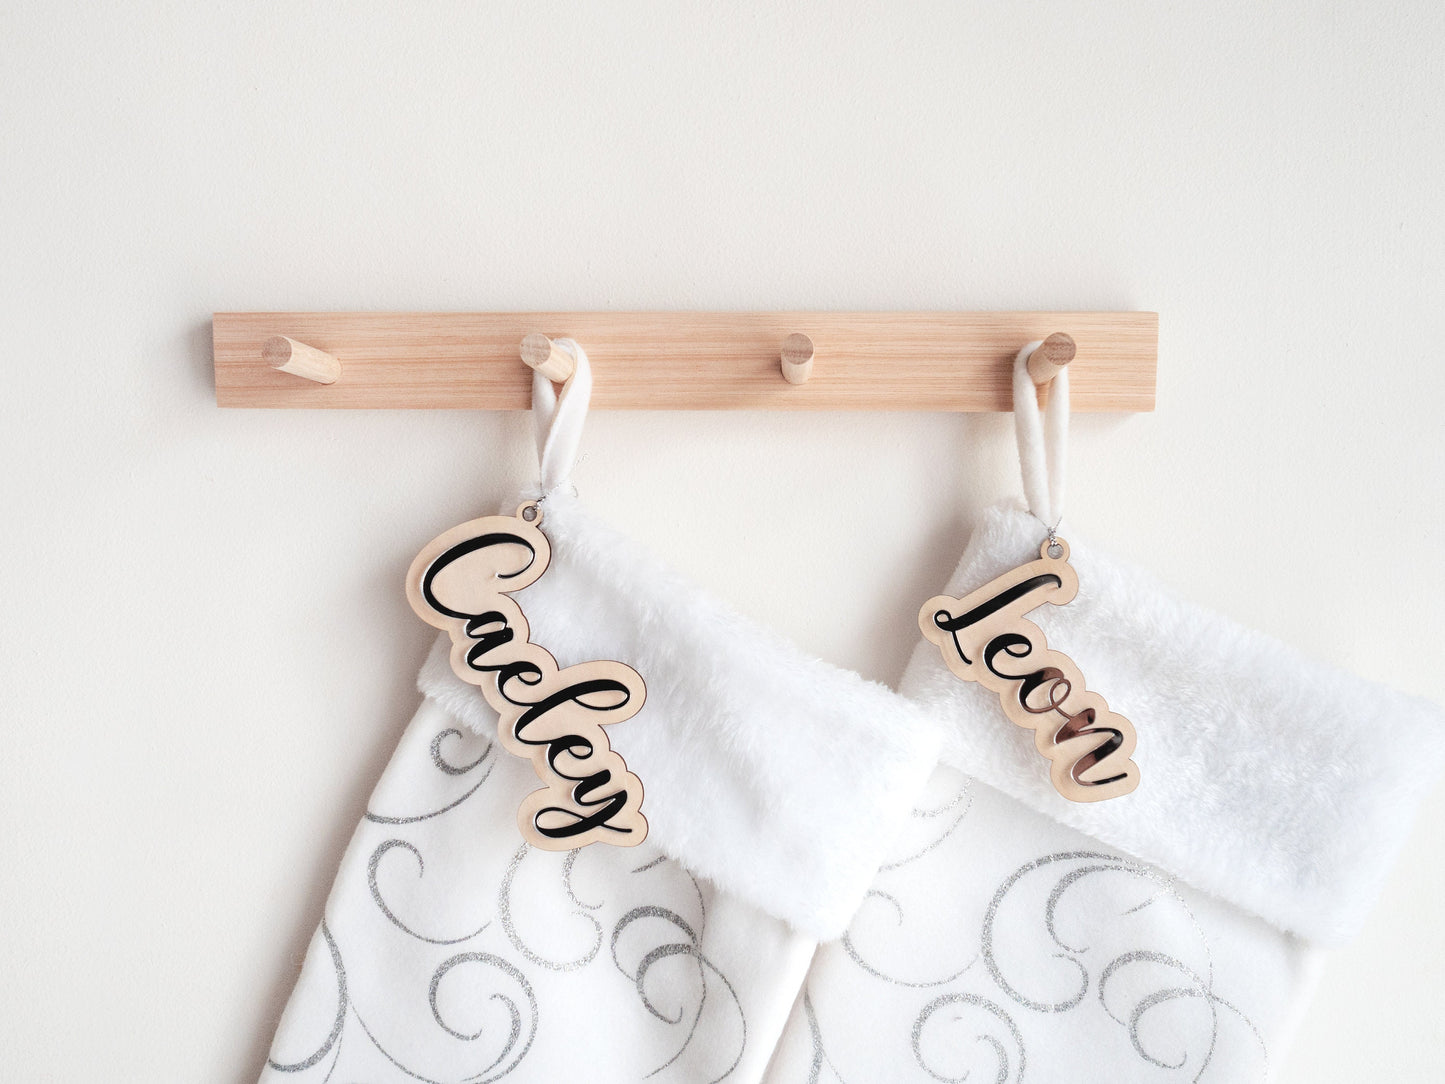 Stocking Name Tags (Double-Layered - No stocking inc, 1 piece) - Personalised Christmas Stocking Tag, Christmas Tags, Stocking Name Tags